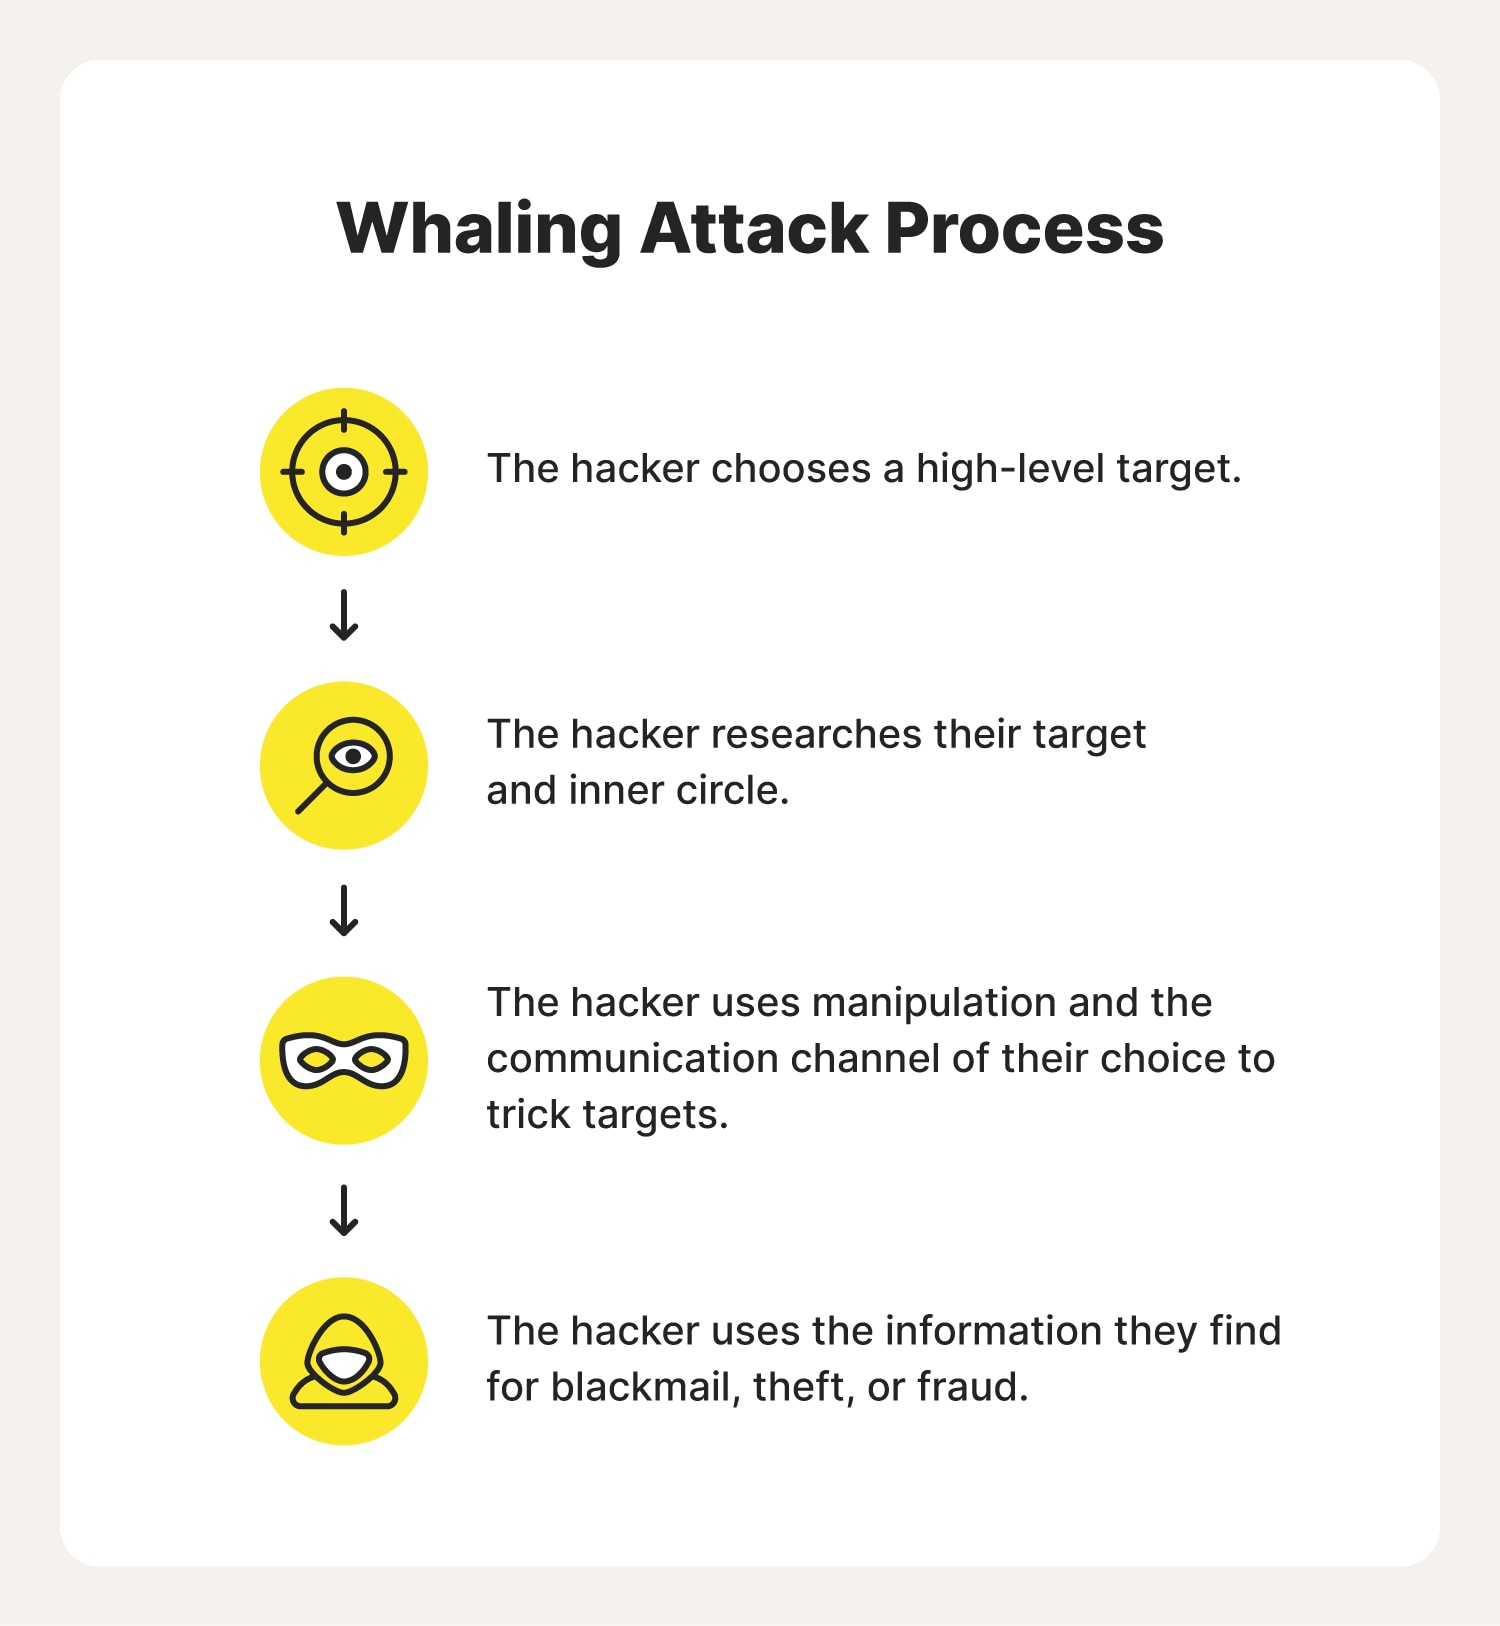 Steps involved in the whaling attack process. 